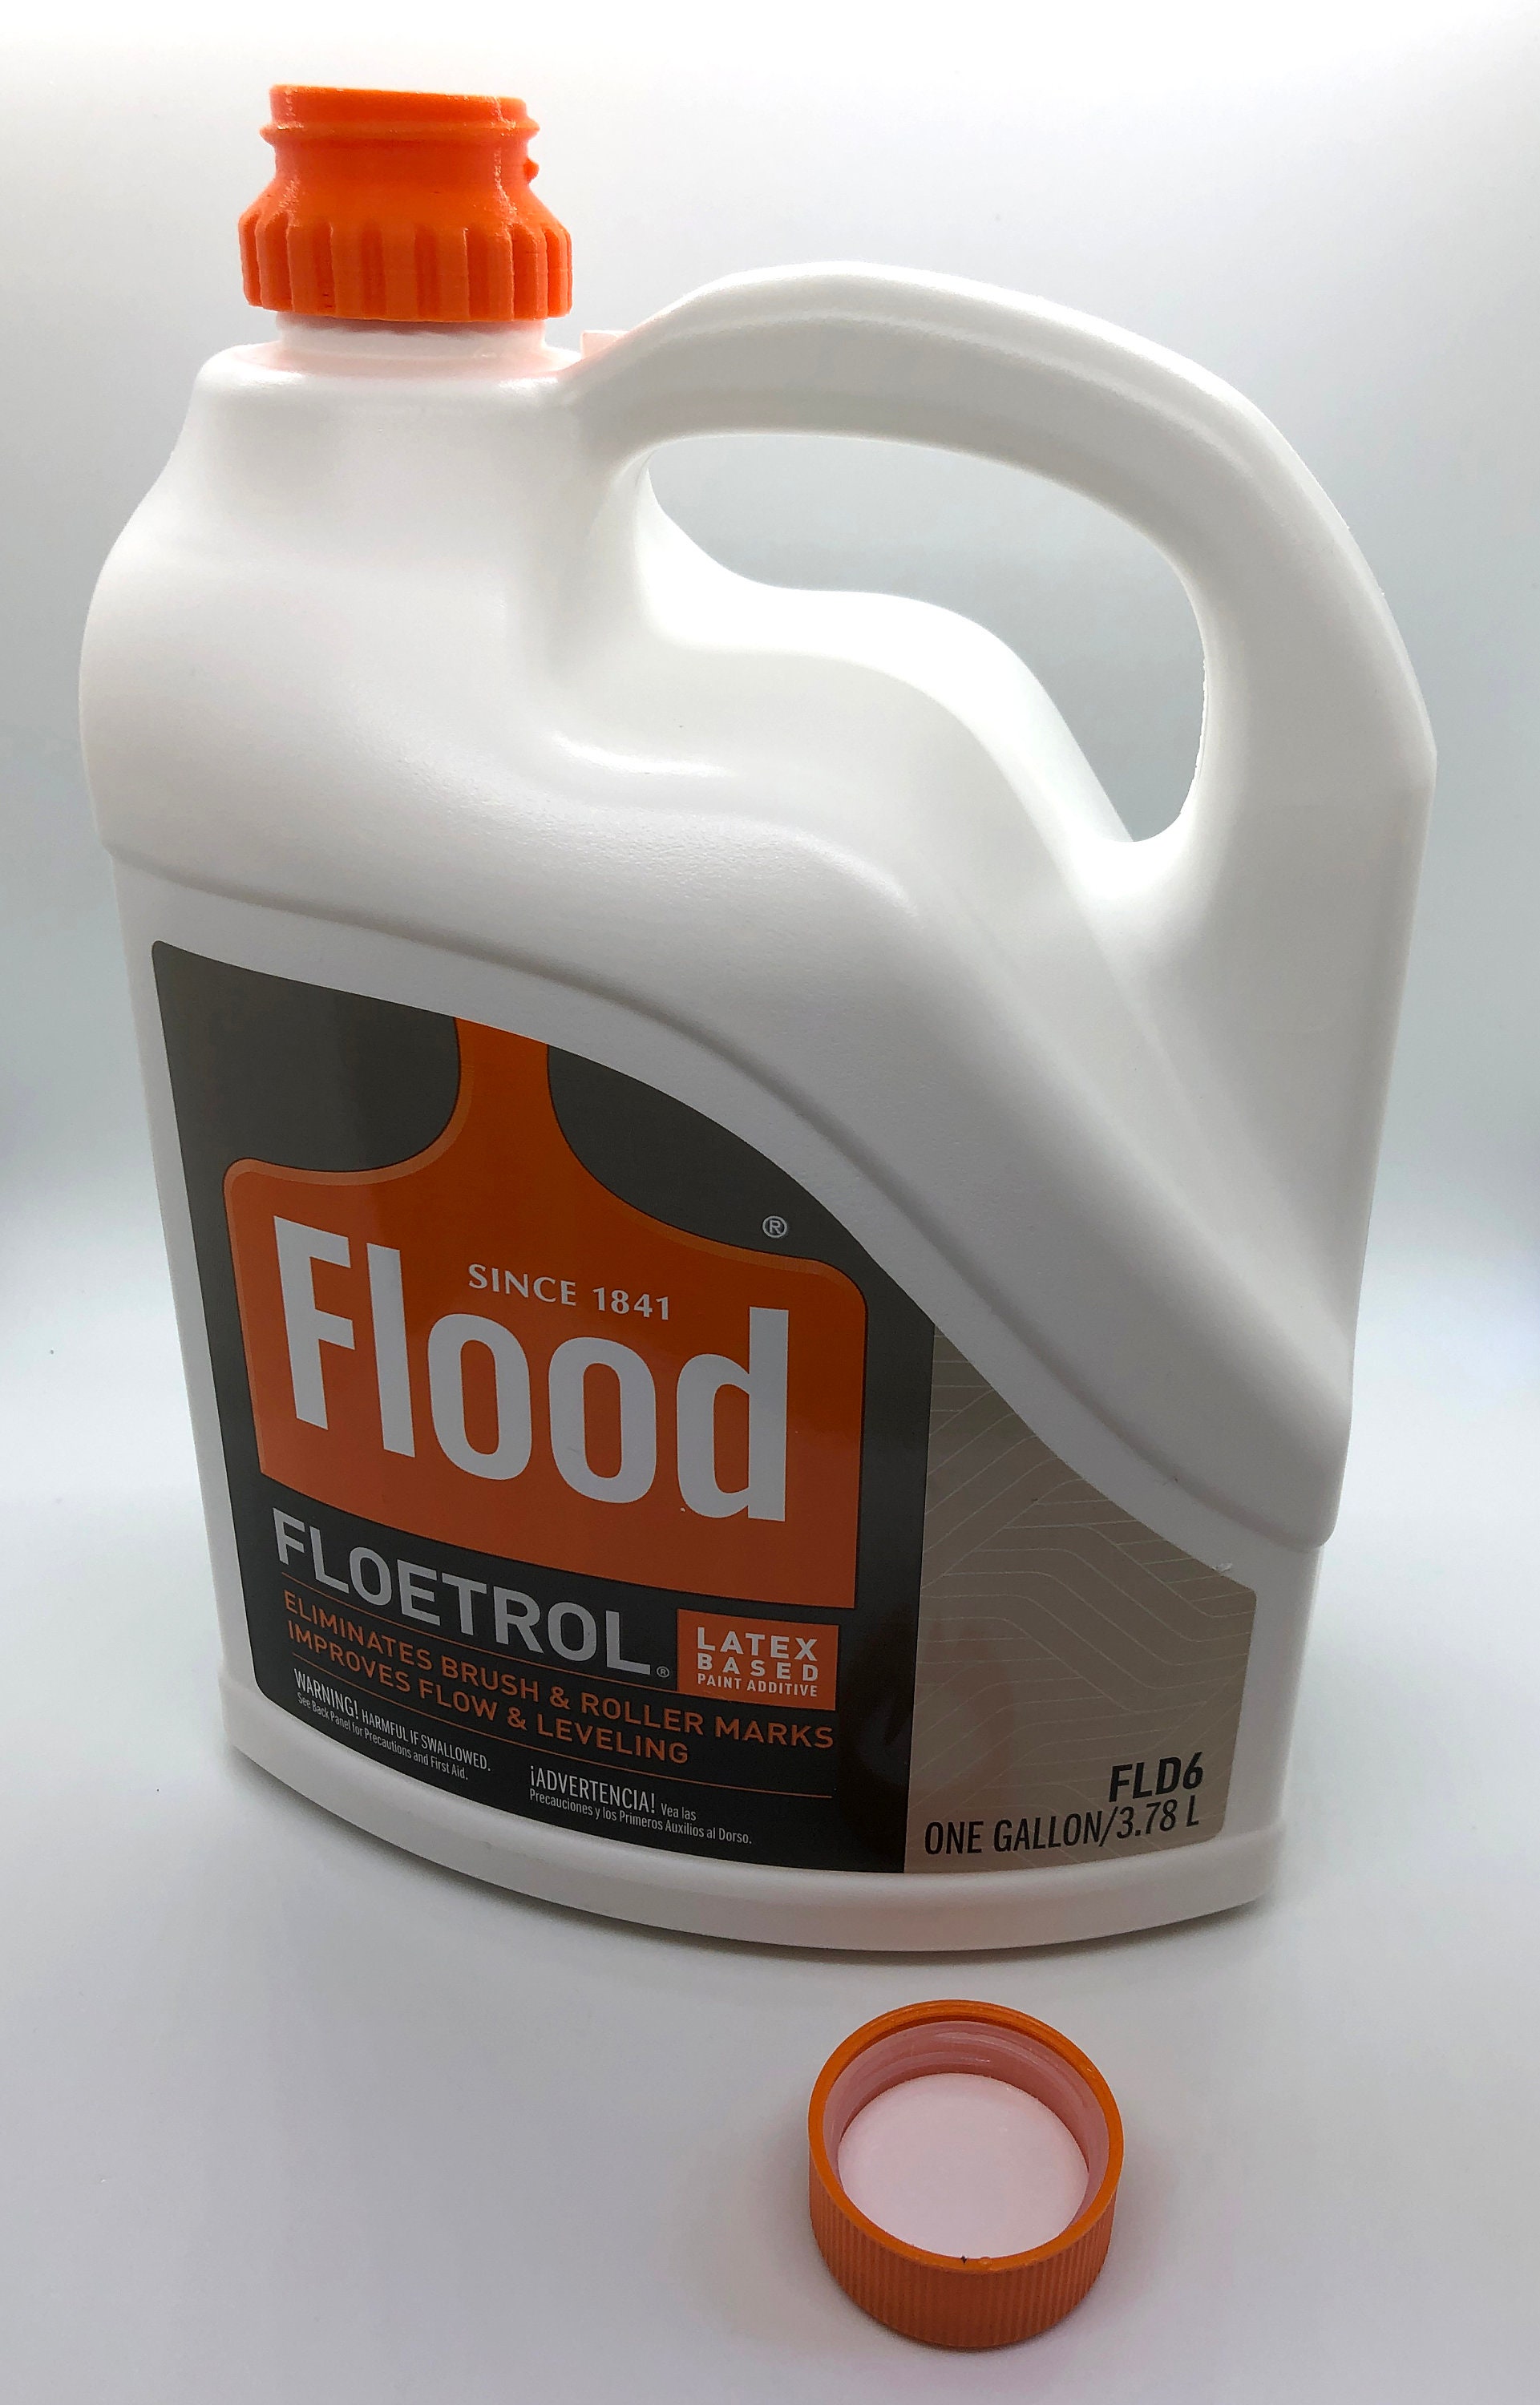 Floetrol-flood FINE Filter for Paint Pouring/ Fluid Painting Fits Us-one  Gallon Floetrol-flood Filter Cap for Floetrol Jugus 